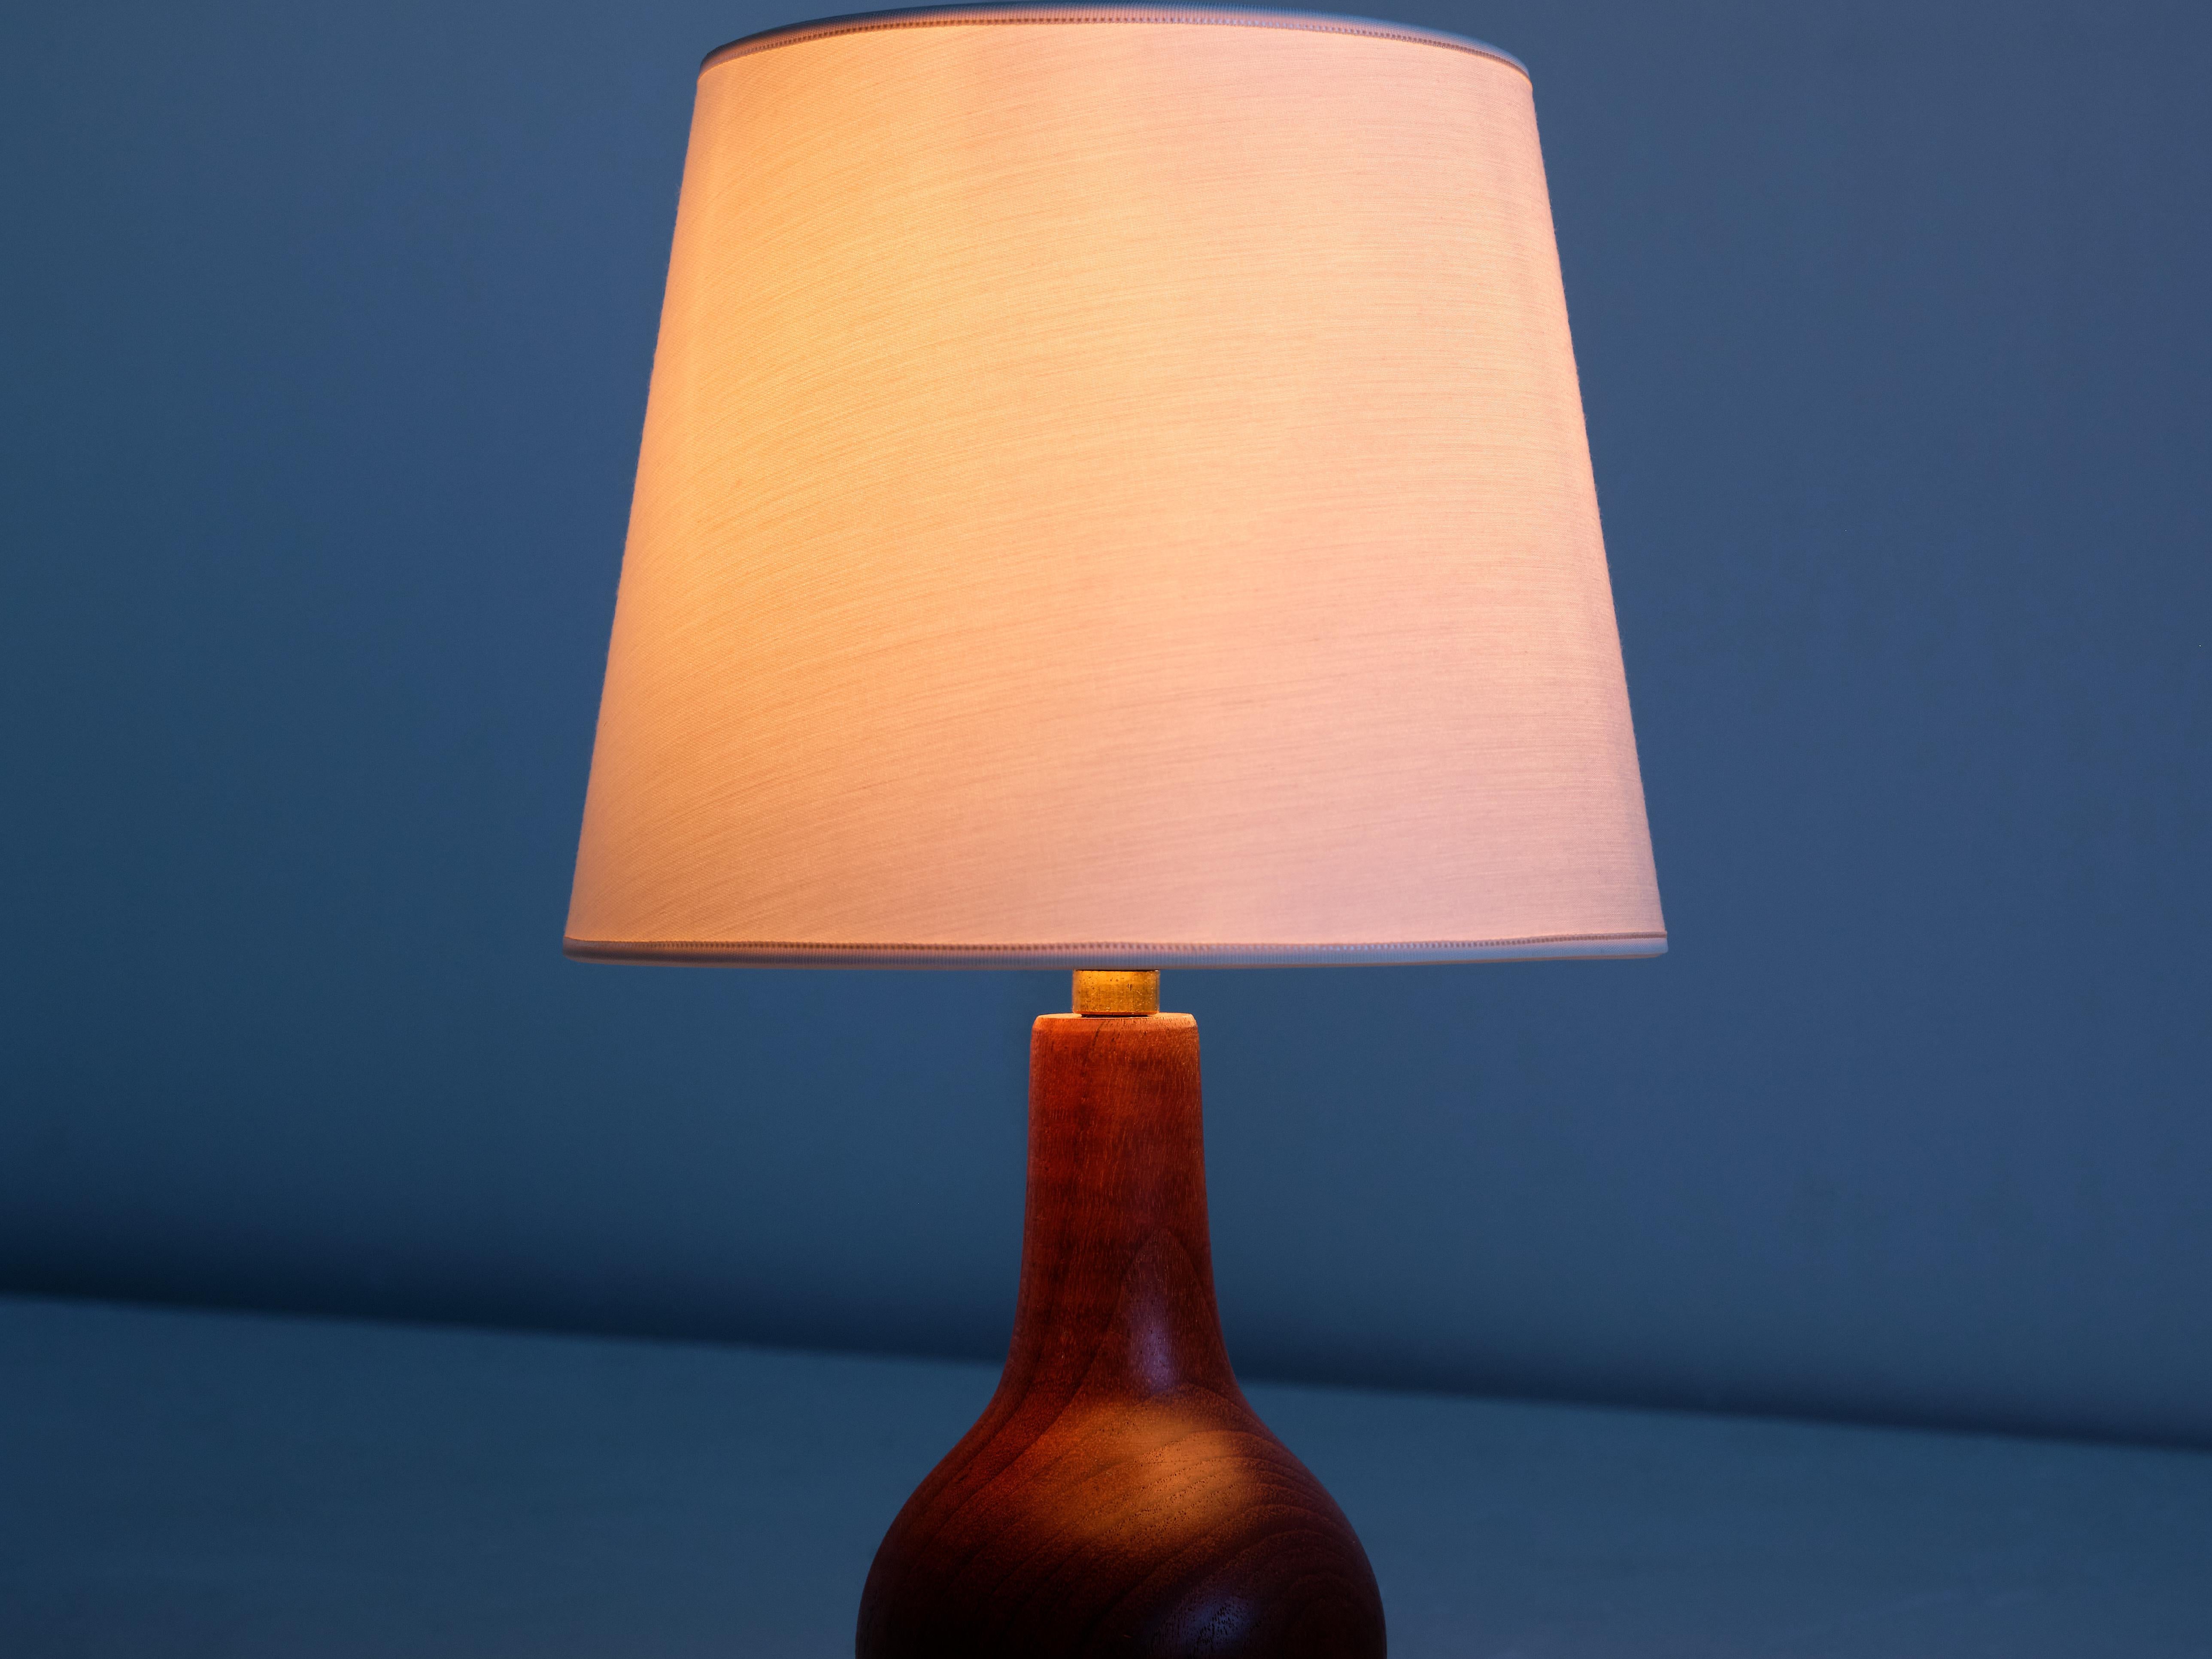 Sculptural Table Lamp in Teak Wood and Ivory Drum Shade, Denmark, 1960s For Sale 1